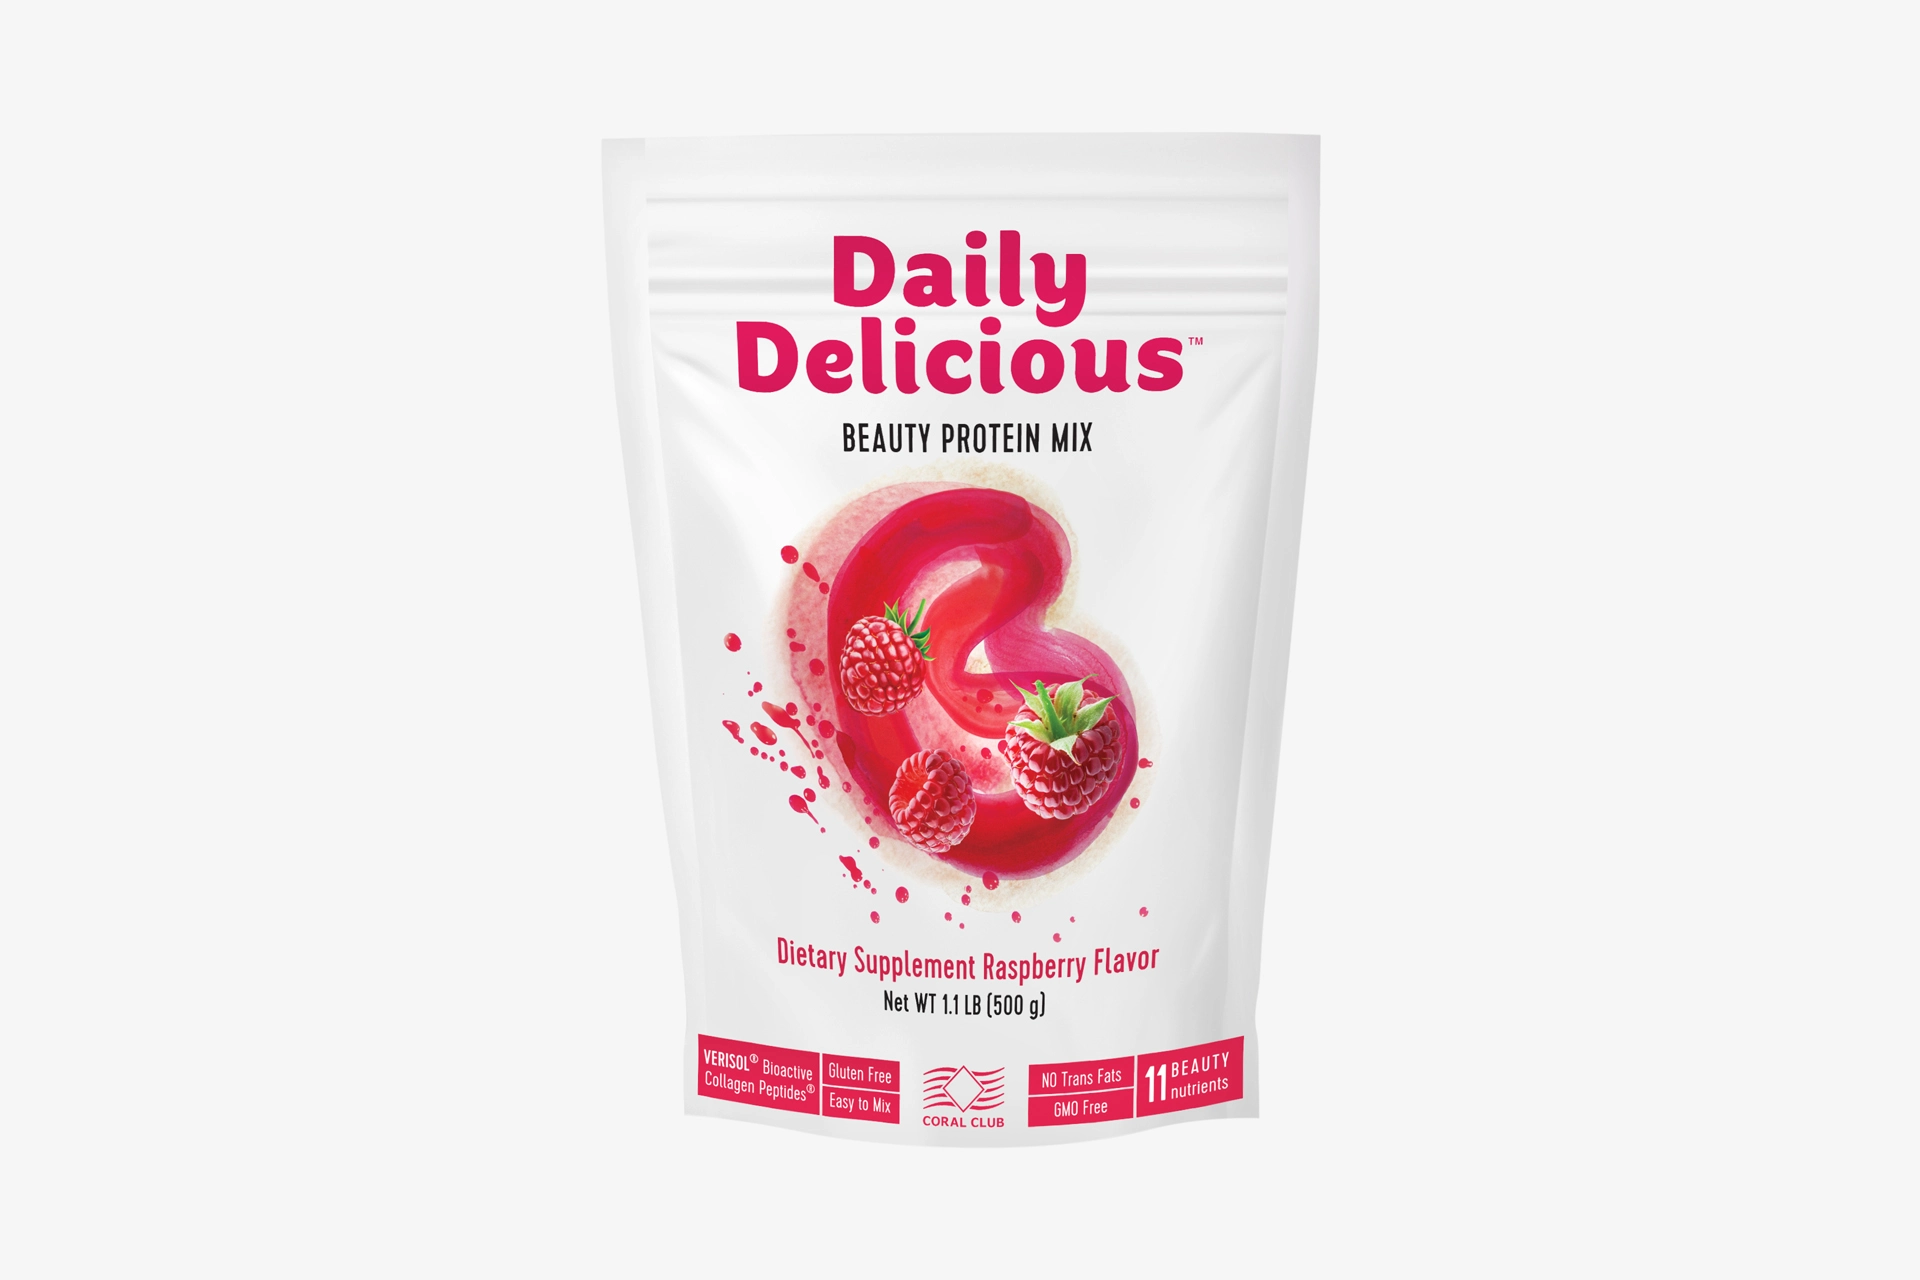 Daily Delicious Beauty Protein Mix Raspberry